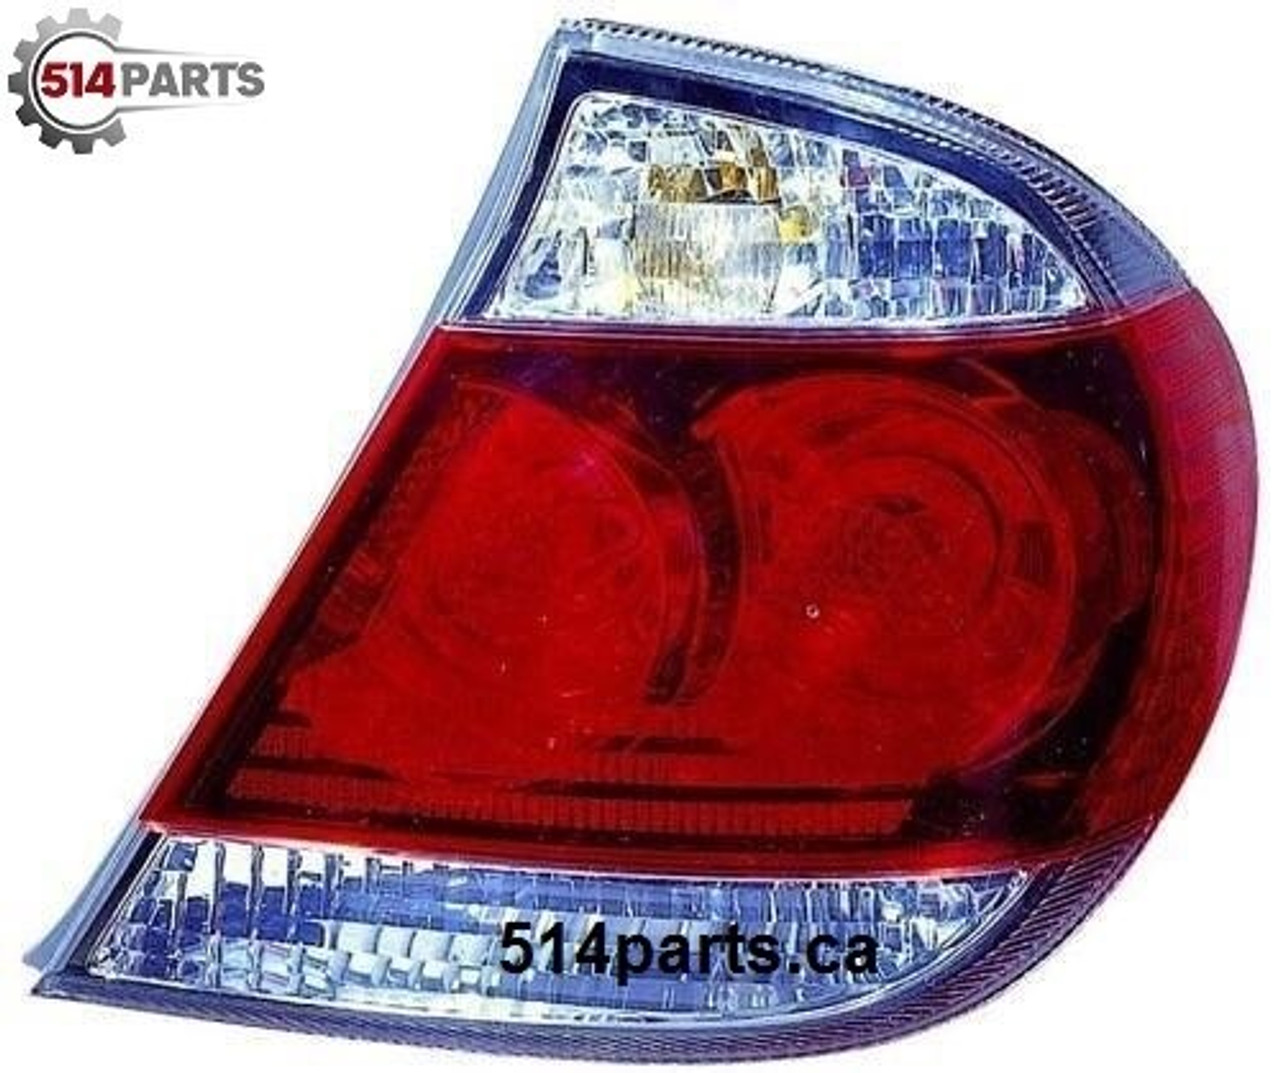 2005 - 2006 TOYOTA CAMRY SE USA BUILT MODELS TAIL LIGHTS - PHARES ARRIERE